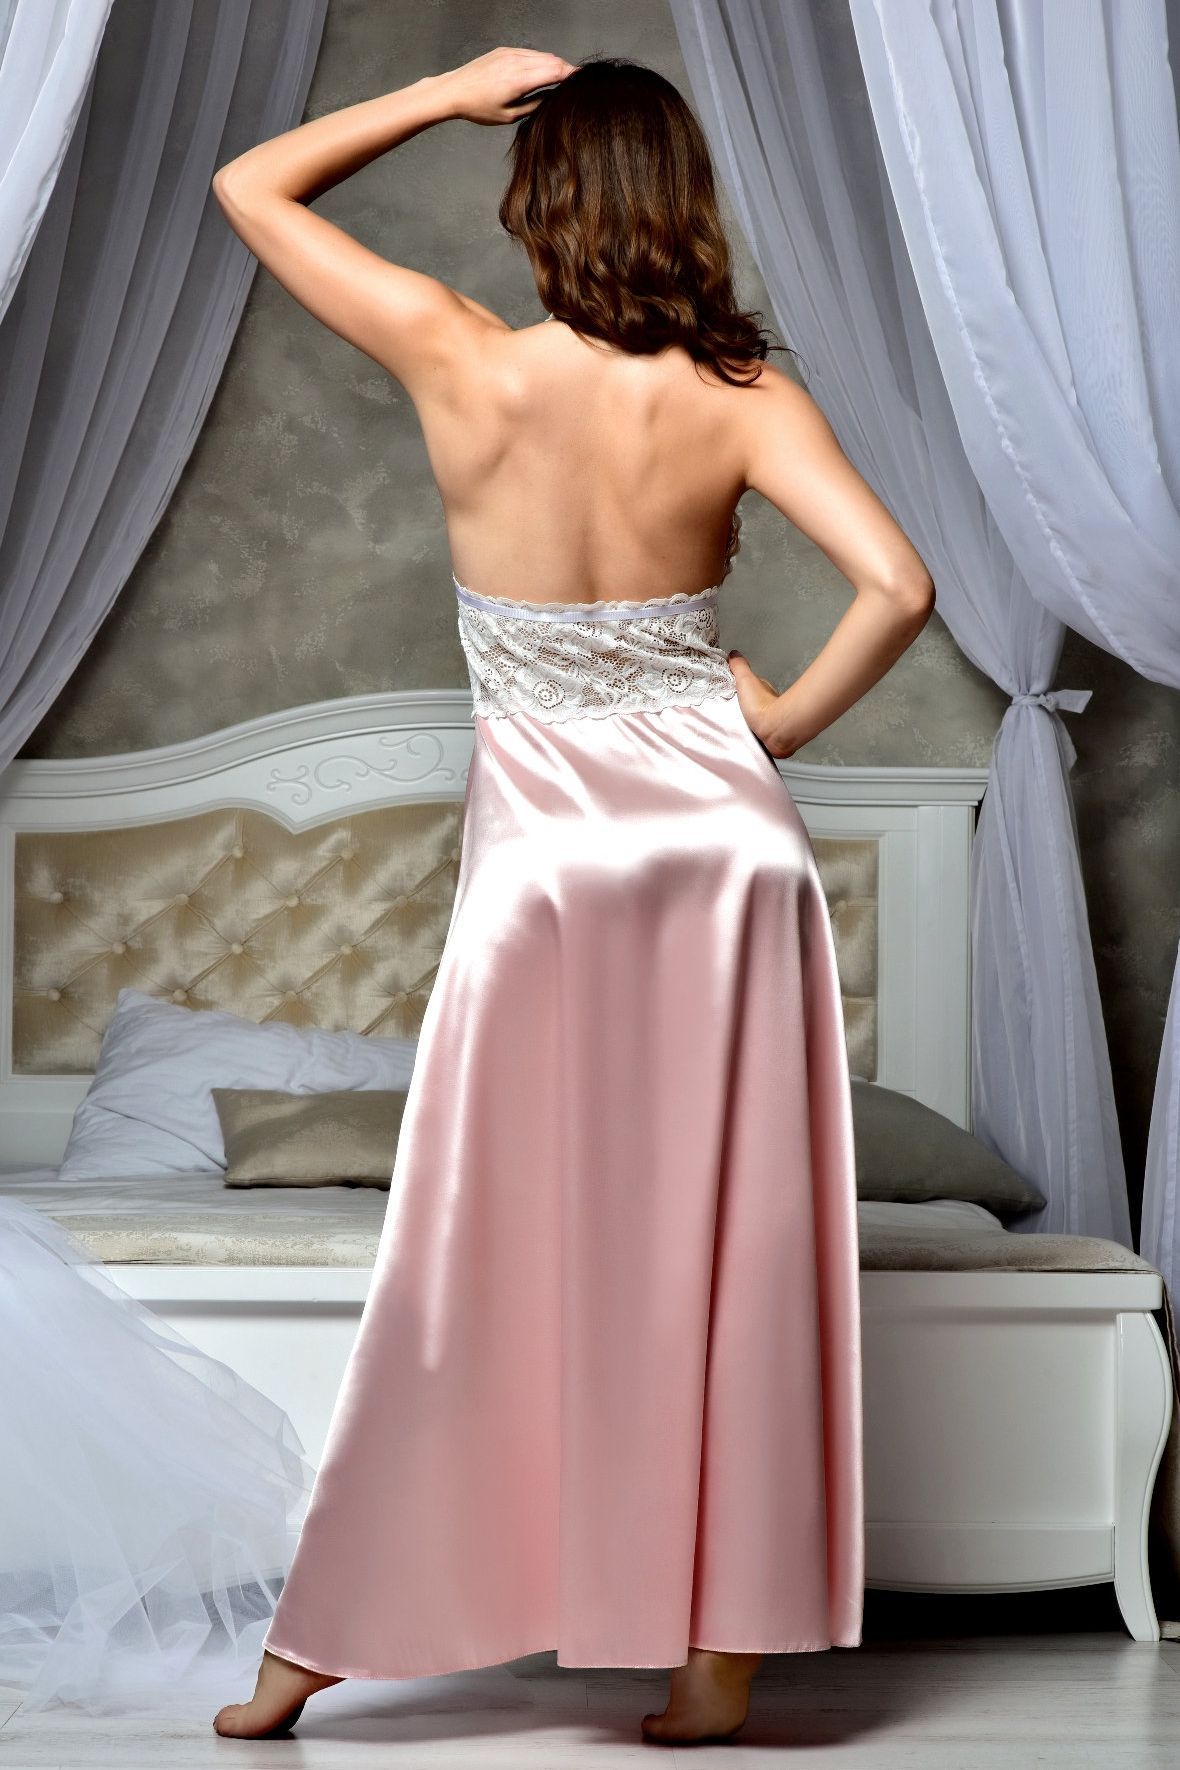 Sexy Open Back Nightgown - Wedding Lingerie